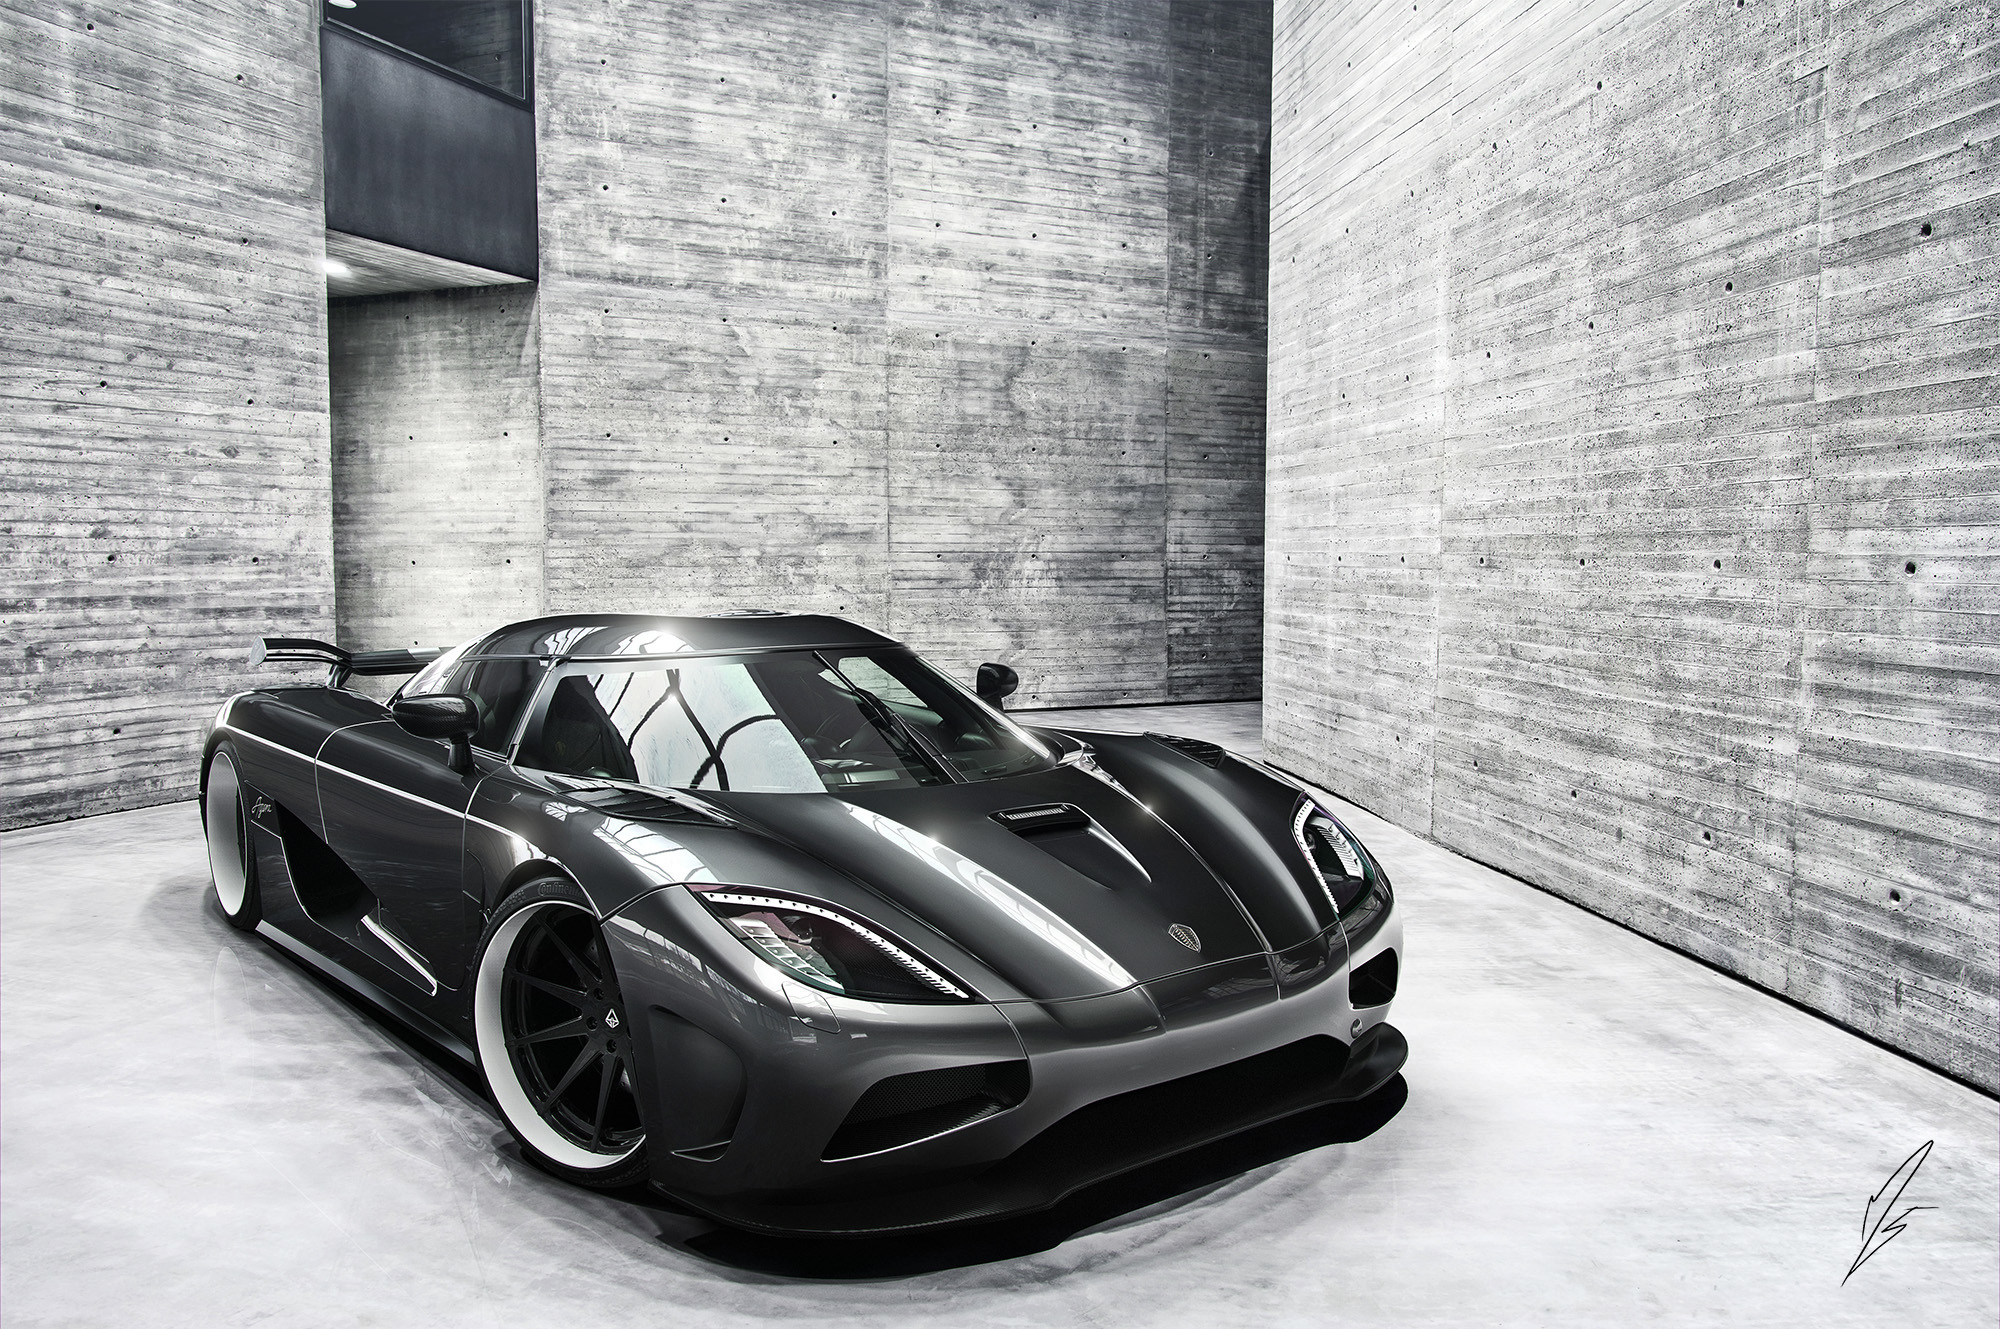 150026 download wallpaper supercar, koenigsegg, cars, front view, agera screensavers and pictures for free